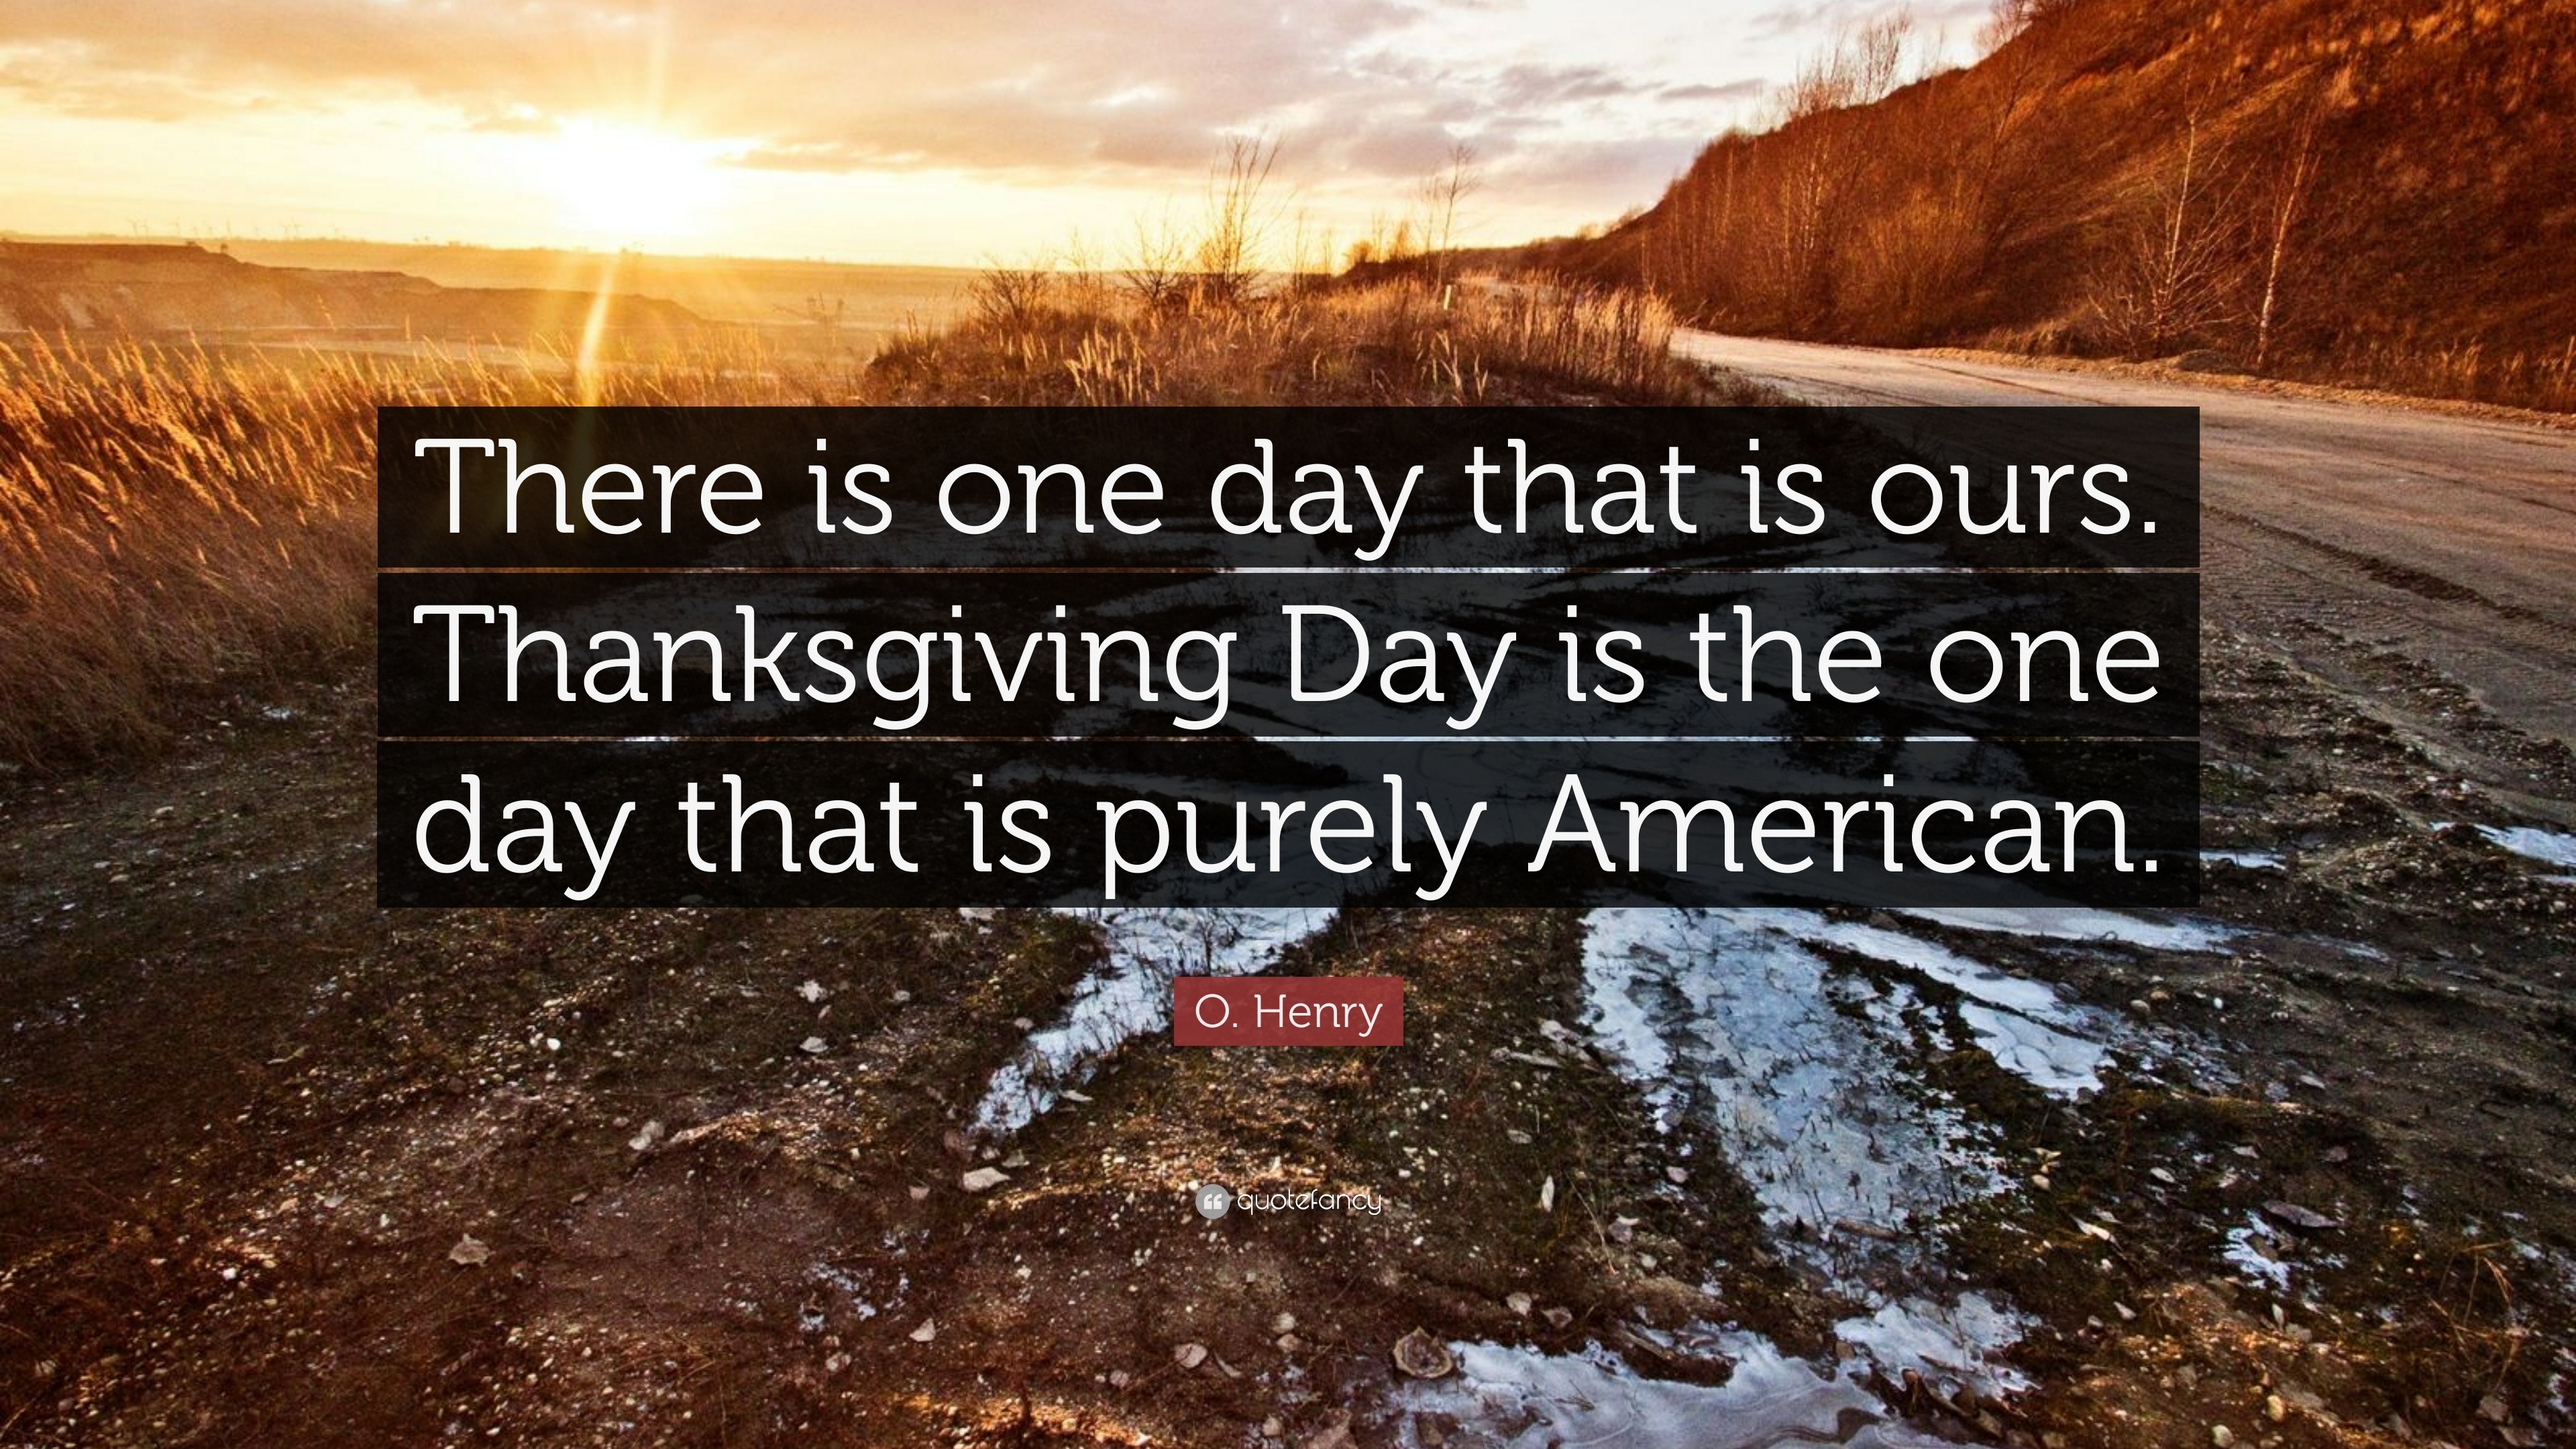 O Henry Quote “There is one day that is ours Thanksgiving Day